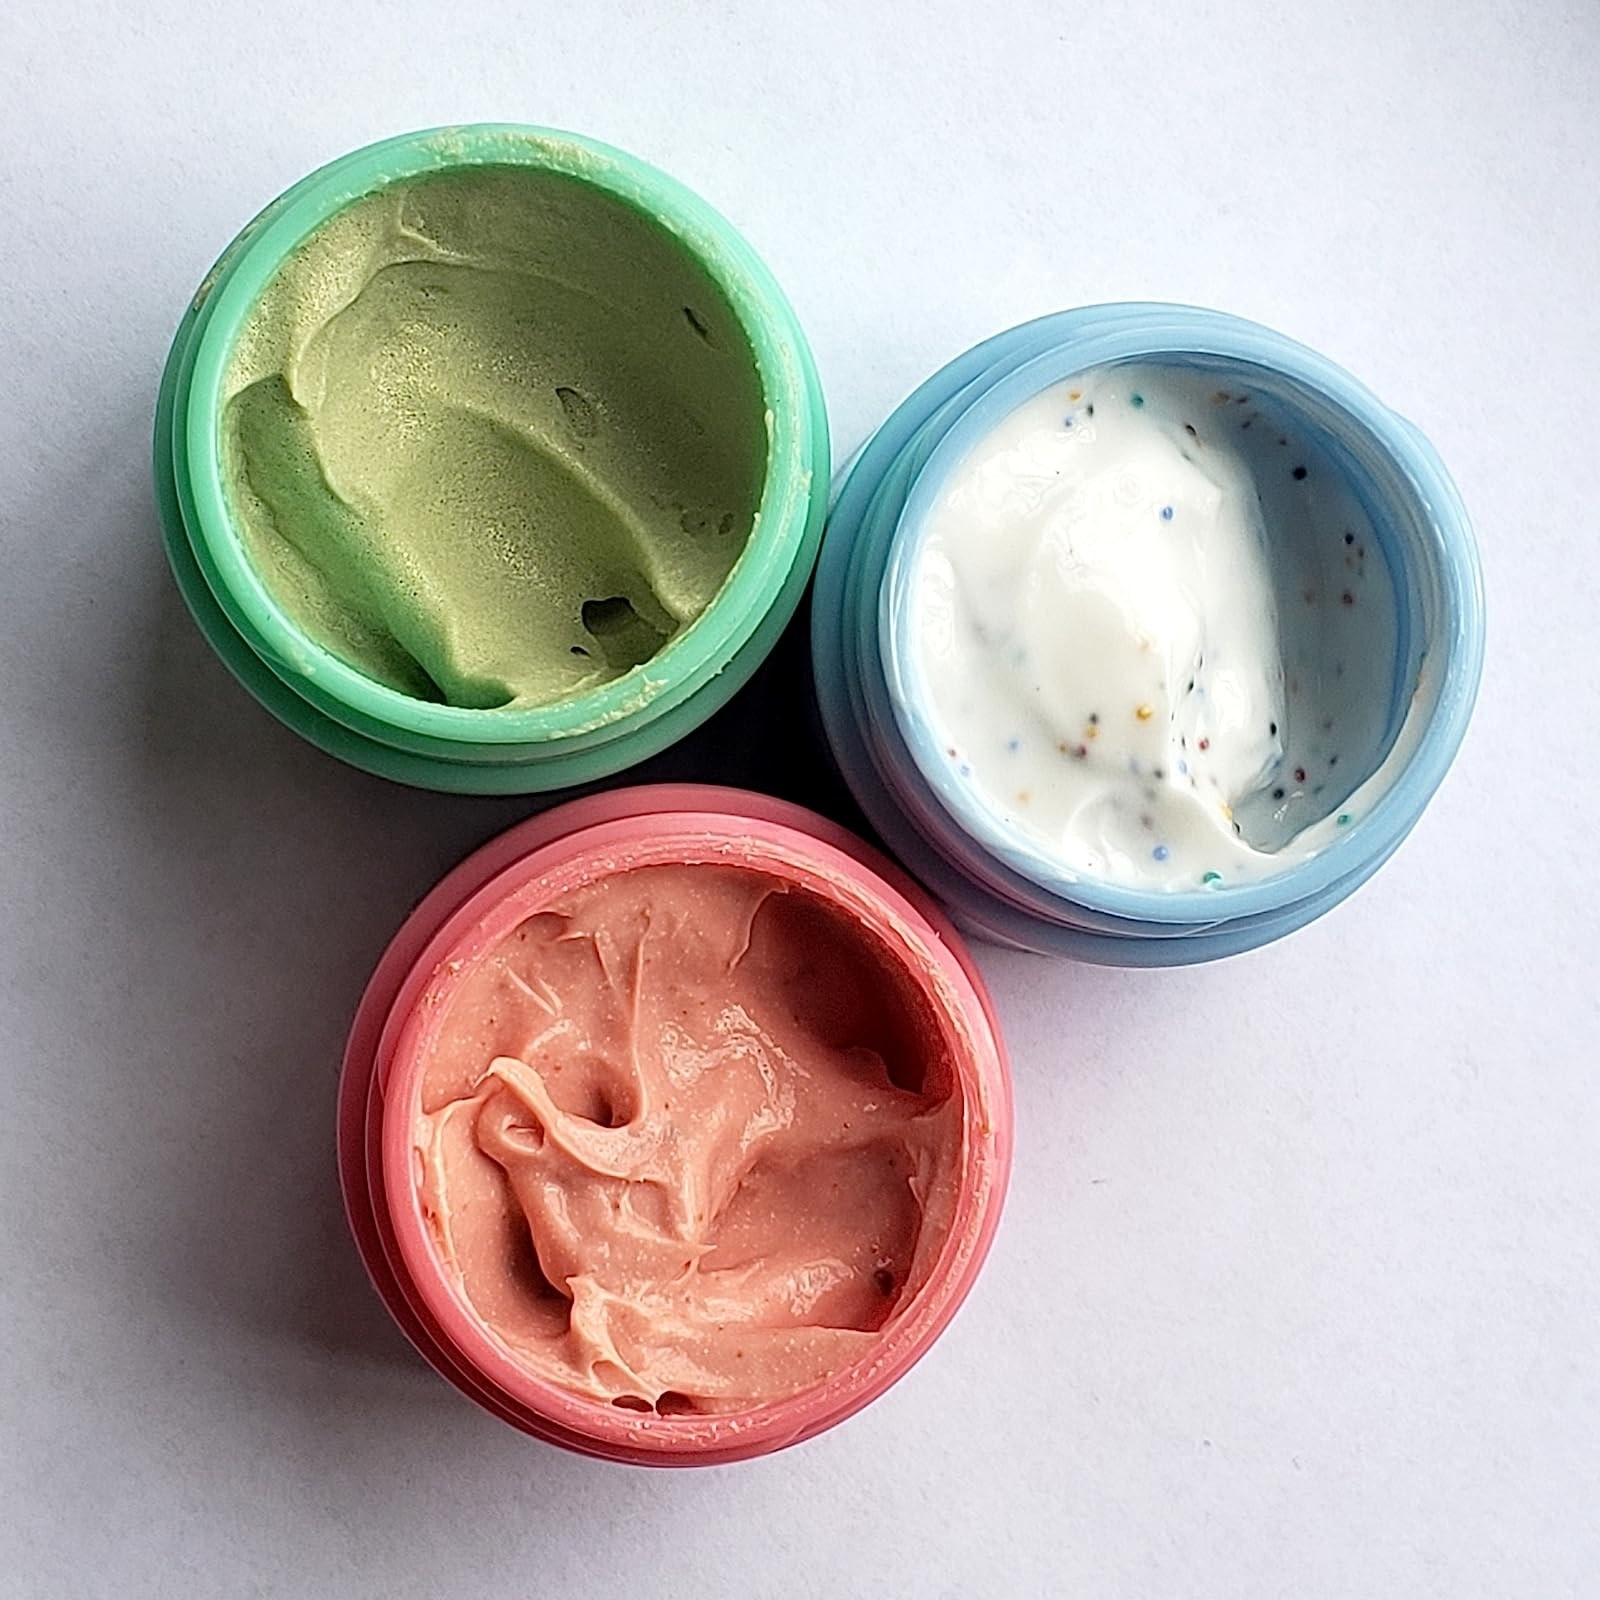 A pink, blue and green container of face masks